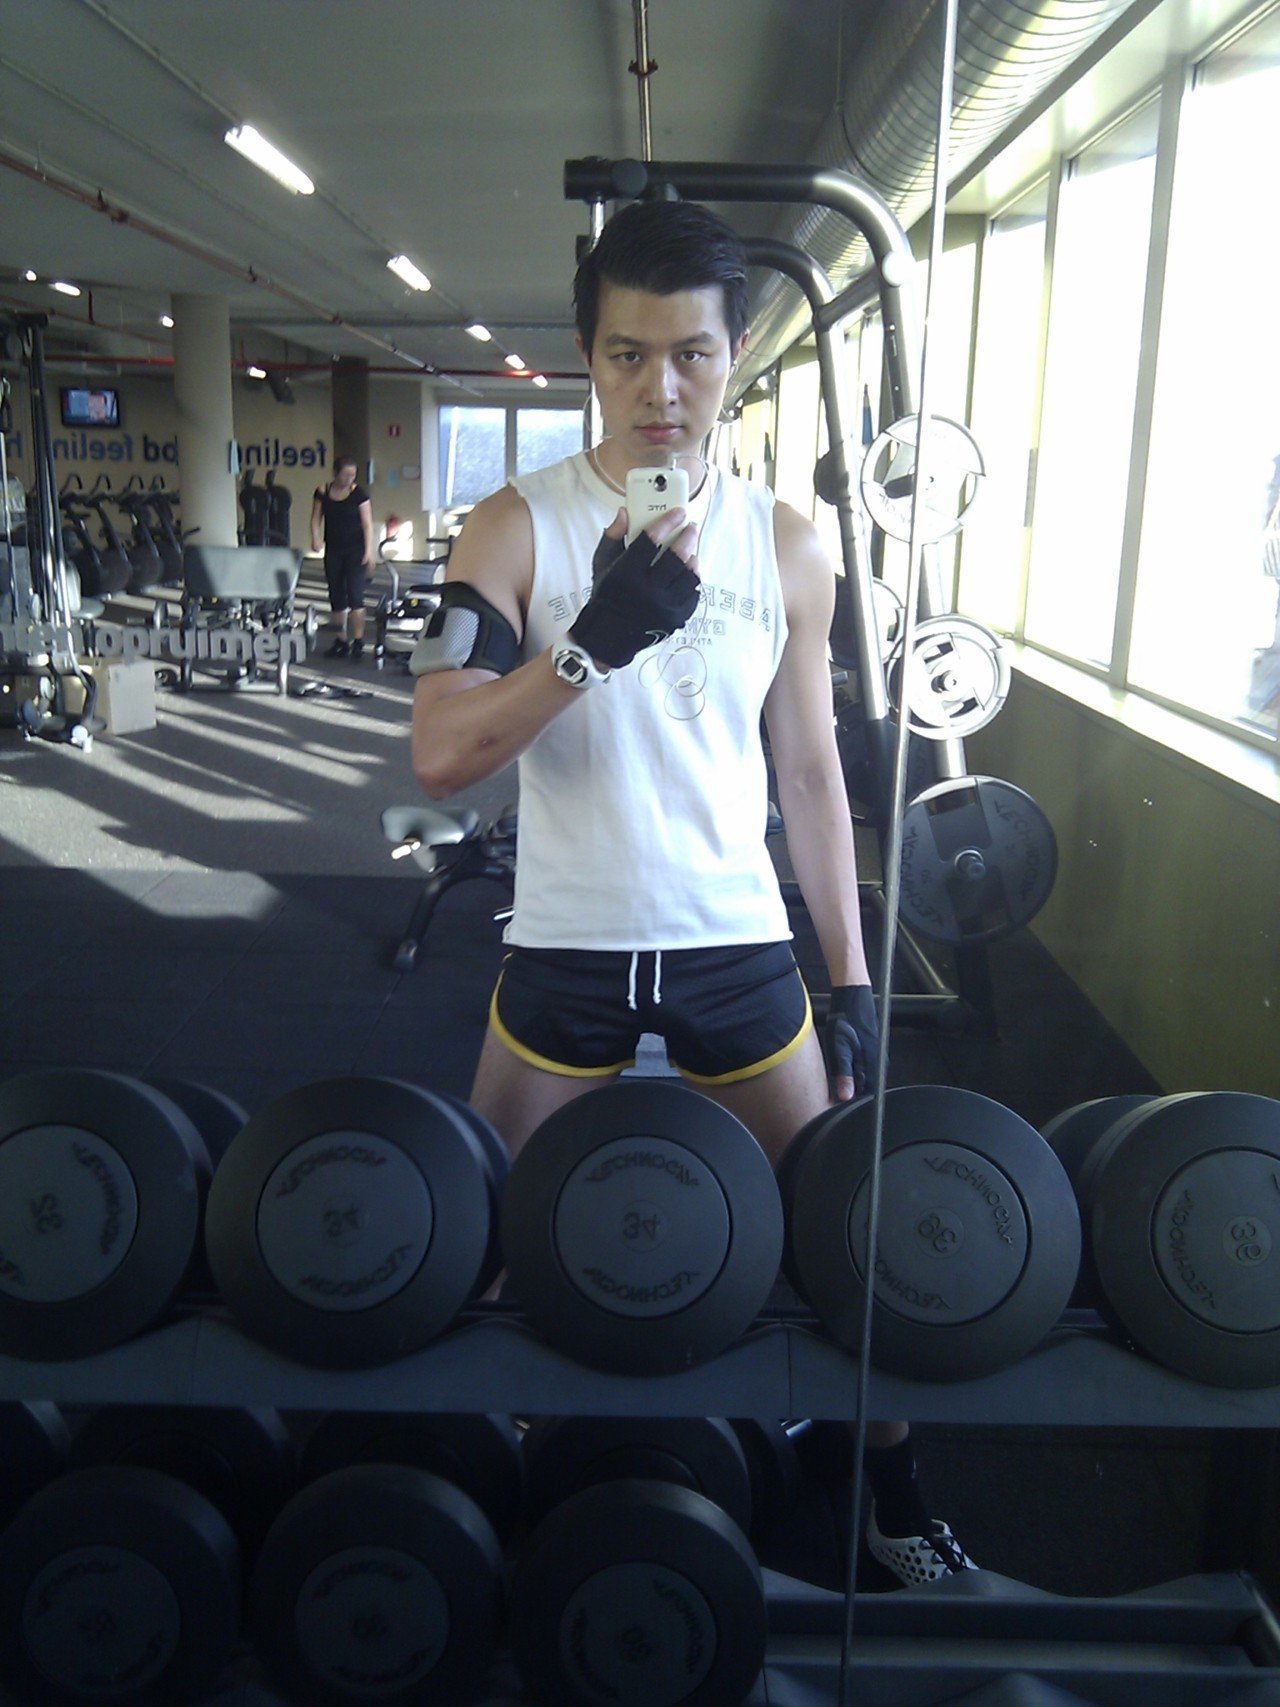 Photo by hartorsten with the username @hartorsten,  July 2, 2013 at 2:15 PM and the text says 'carryitlikeharry:

Gym. Do you like short shorts?
 #selfie  #selfpic  #selfshot  #male  #fashion  #male  #model  #mens  #fashion  #mens  #style  #menswear  #sportswear  #andrew  #christian  #haraldtorsten'